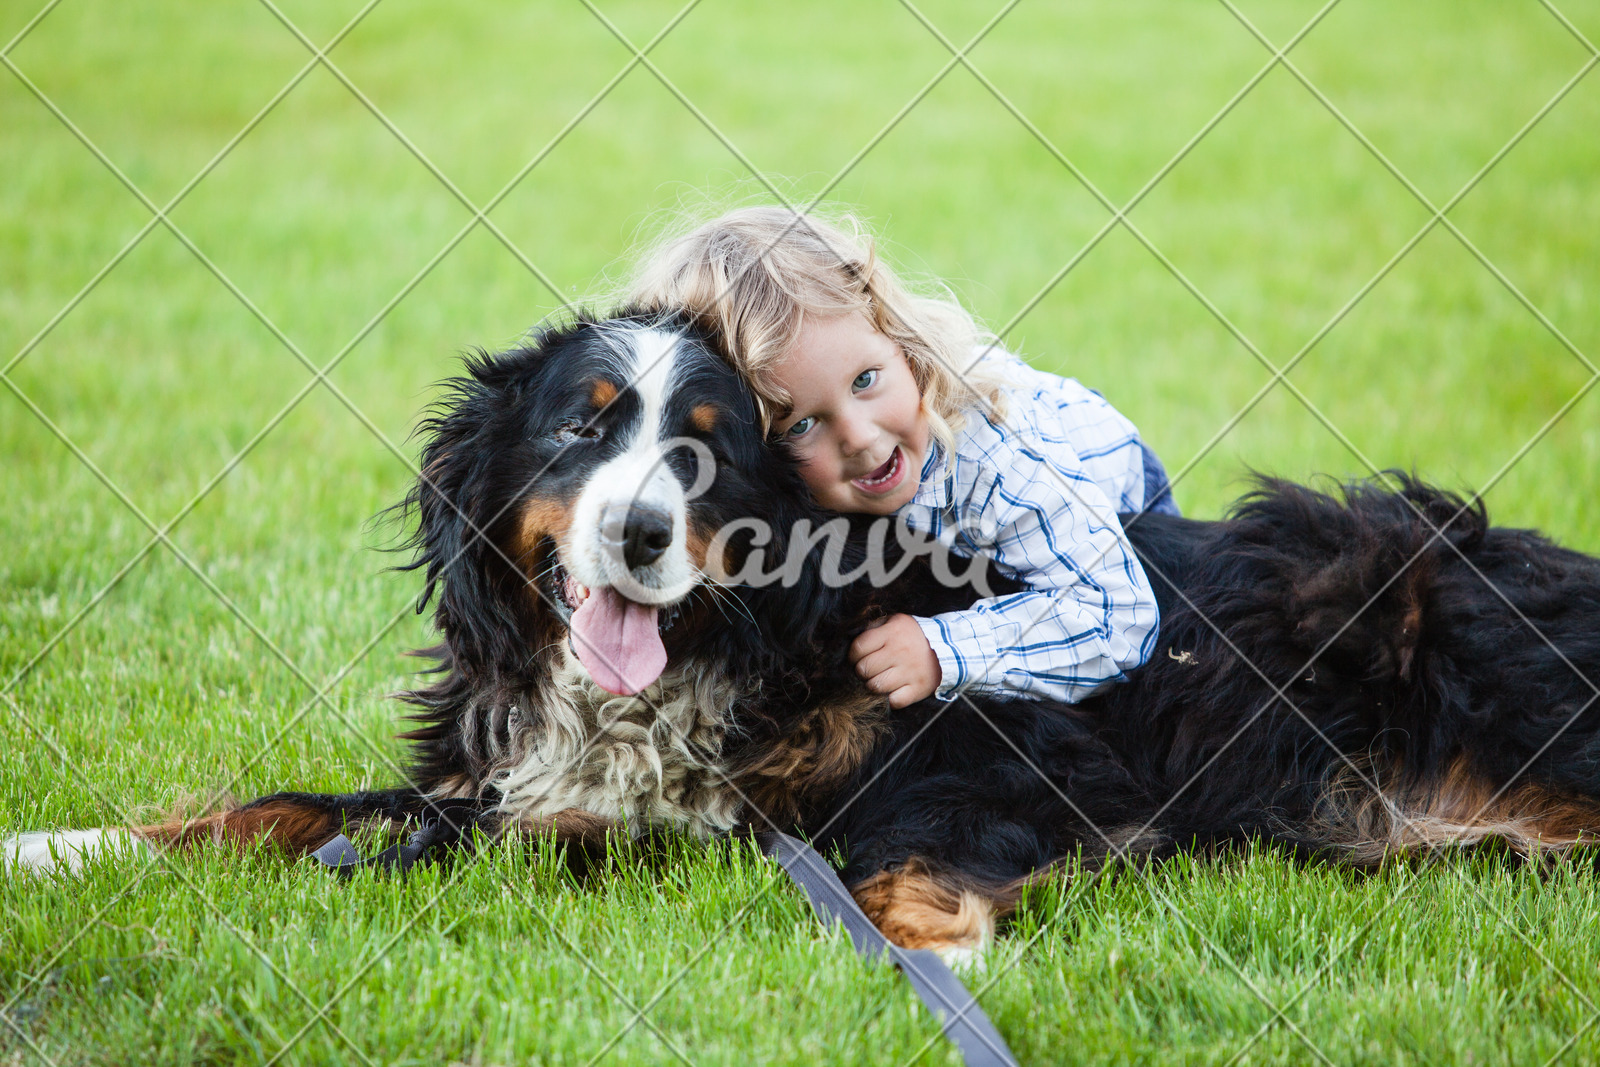 Boy With Curly Blonde Hair Embraces A Bernese Mountain Dog